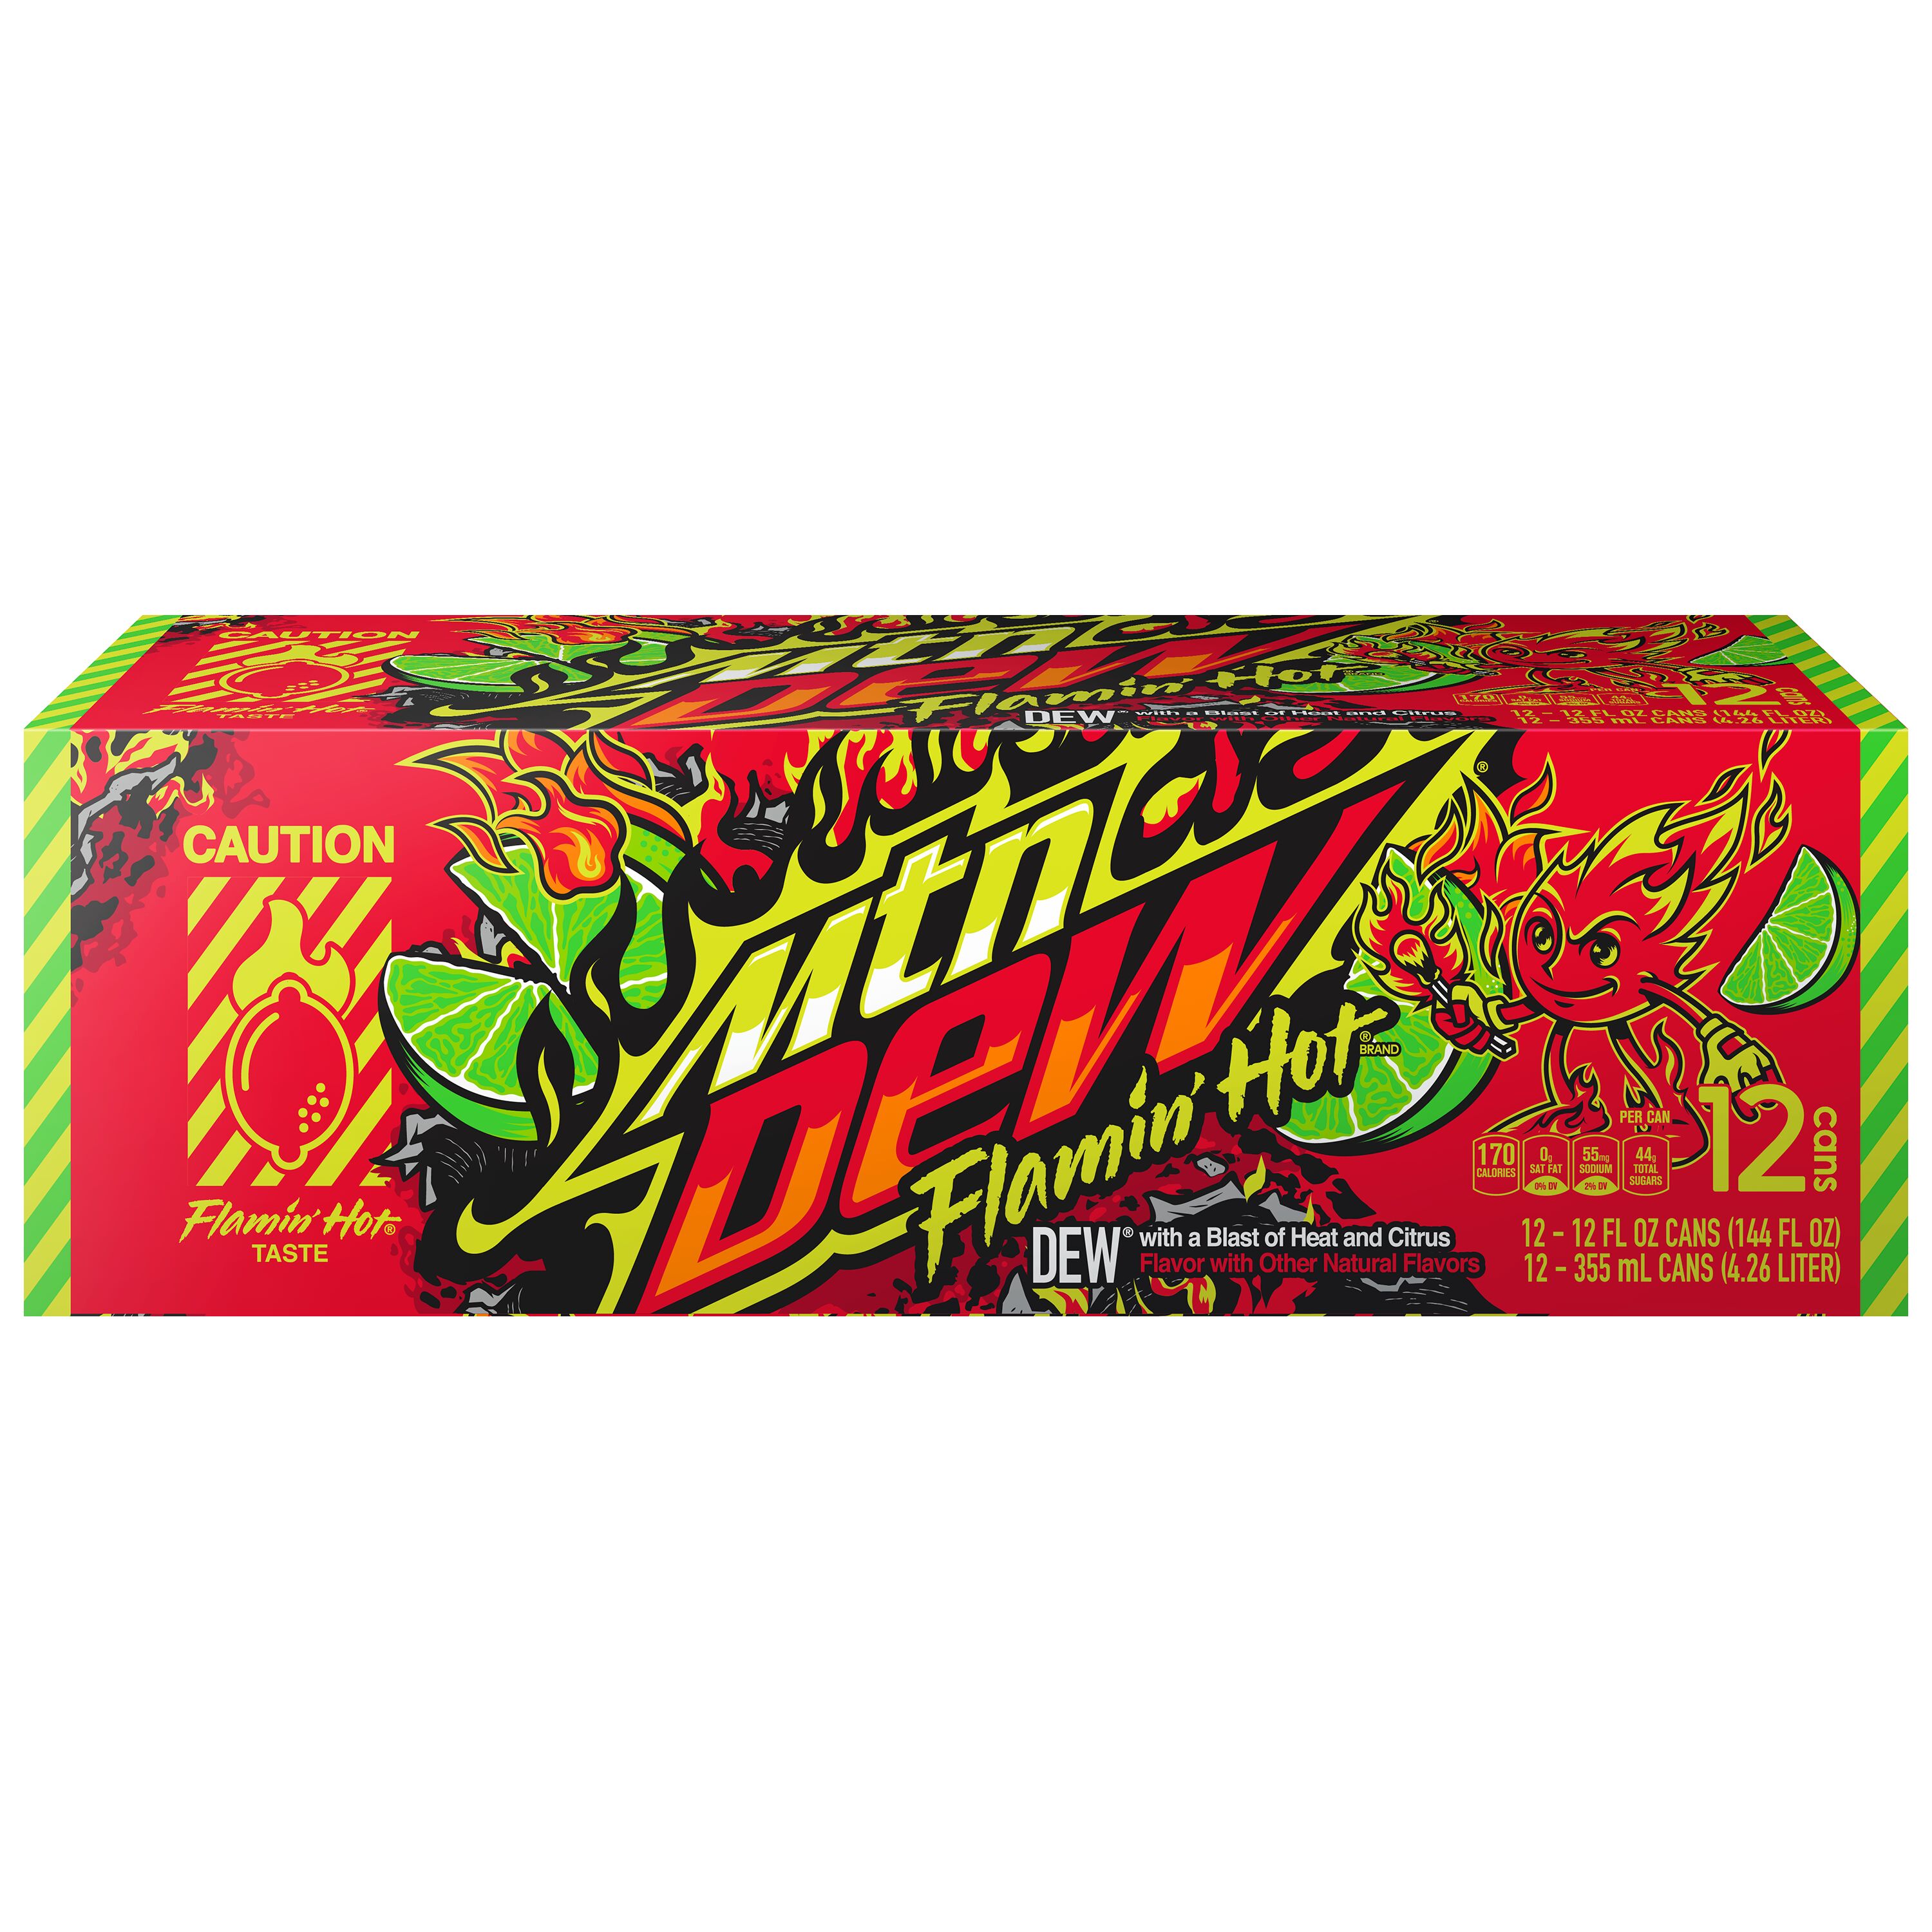 Mountain Dew Flamin' Hot,12 fl oz Can, 12 pack - image 2 of 5